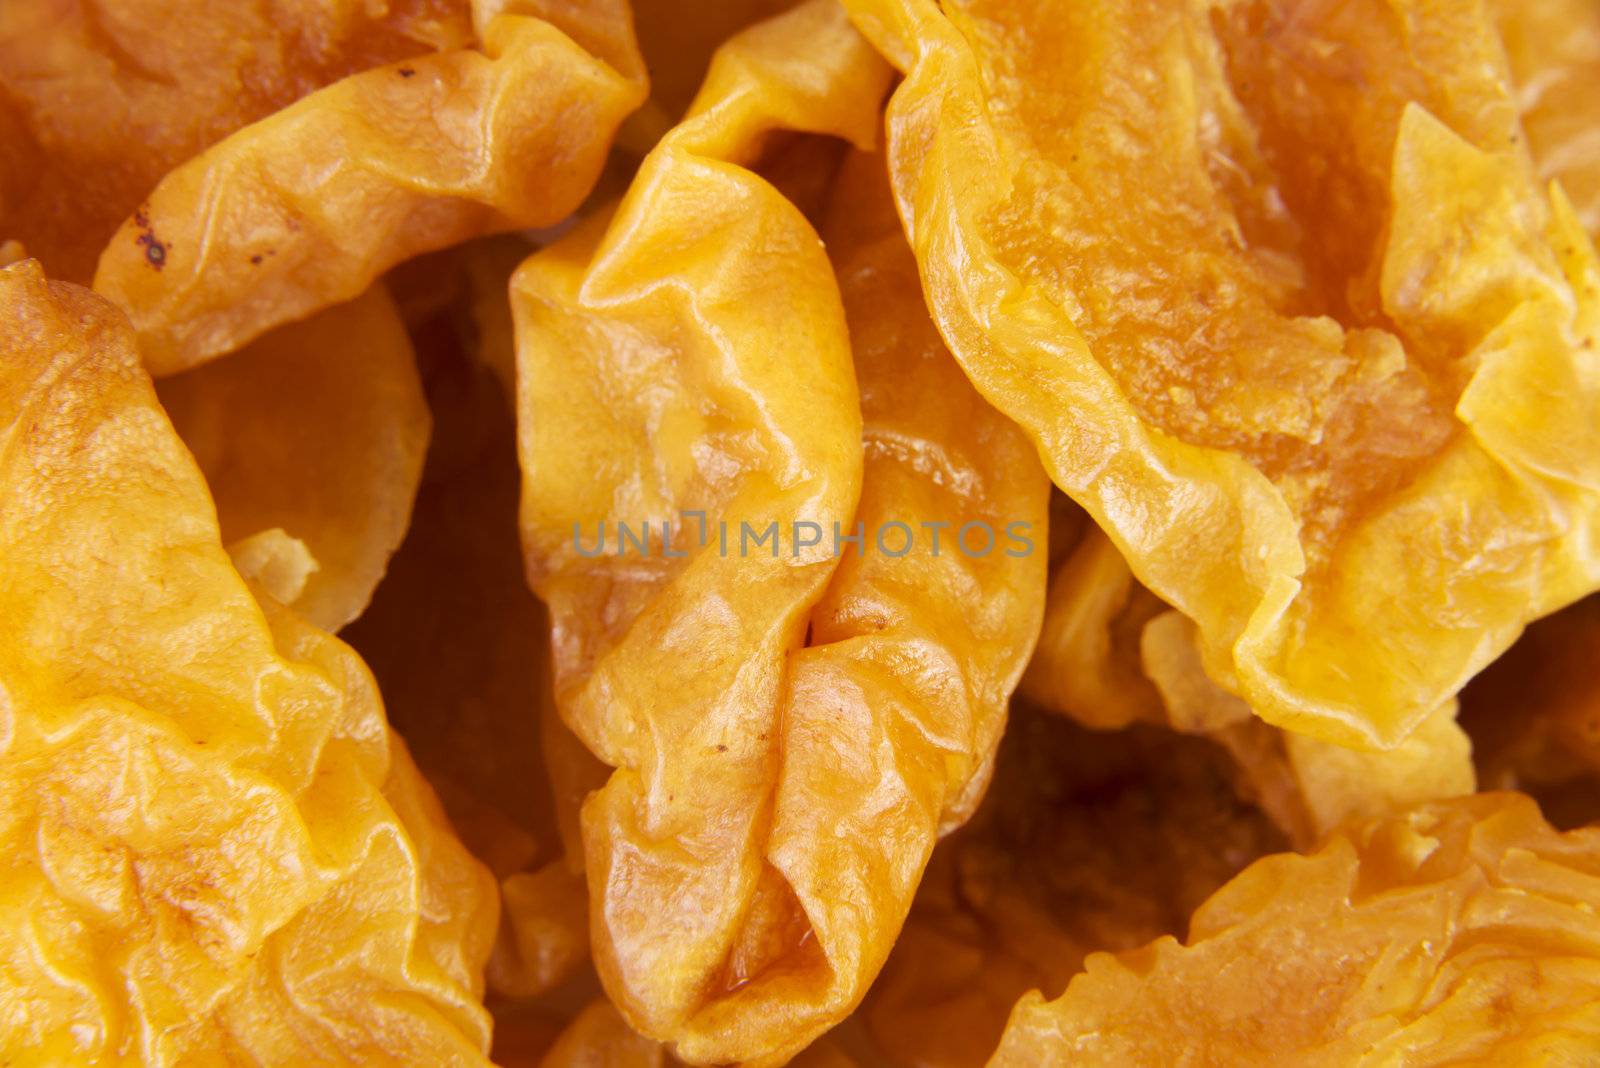 Dried pear by BDS